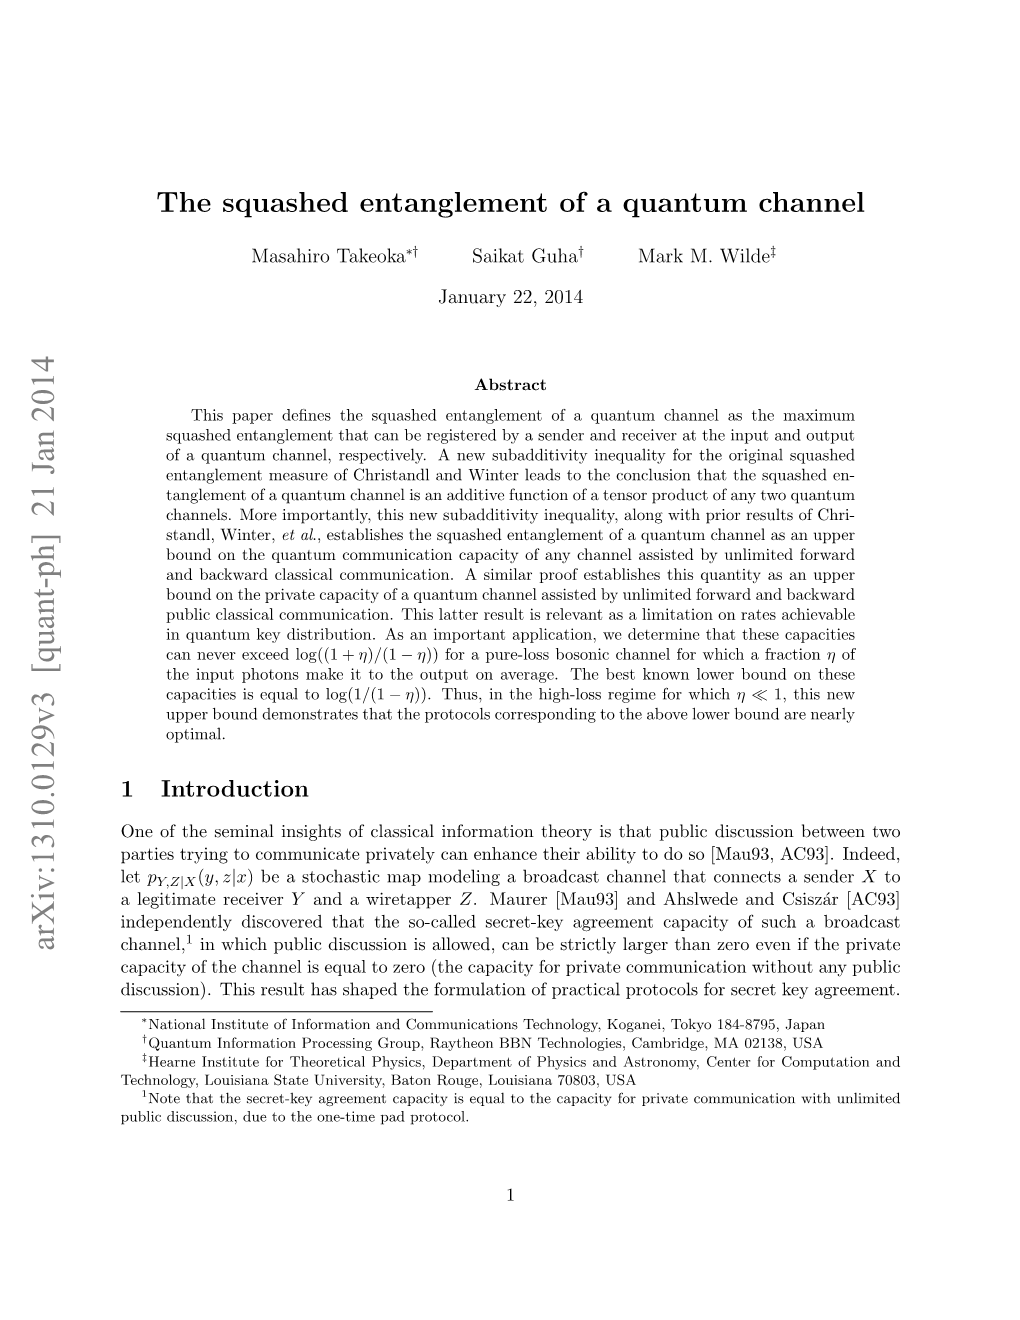 The Squashed Entanglement of a Quantum Channel